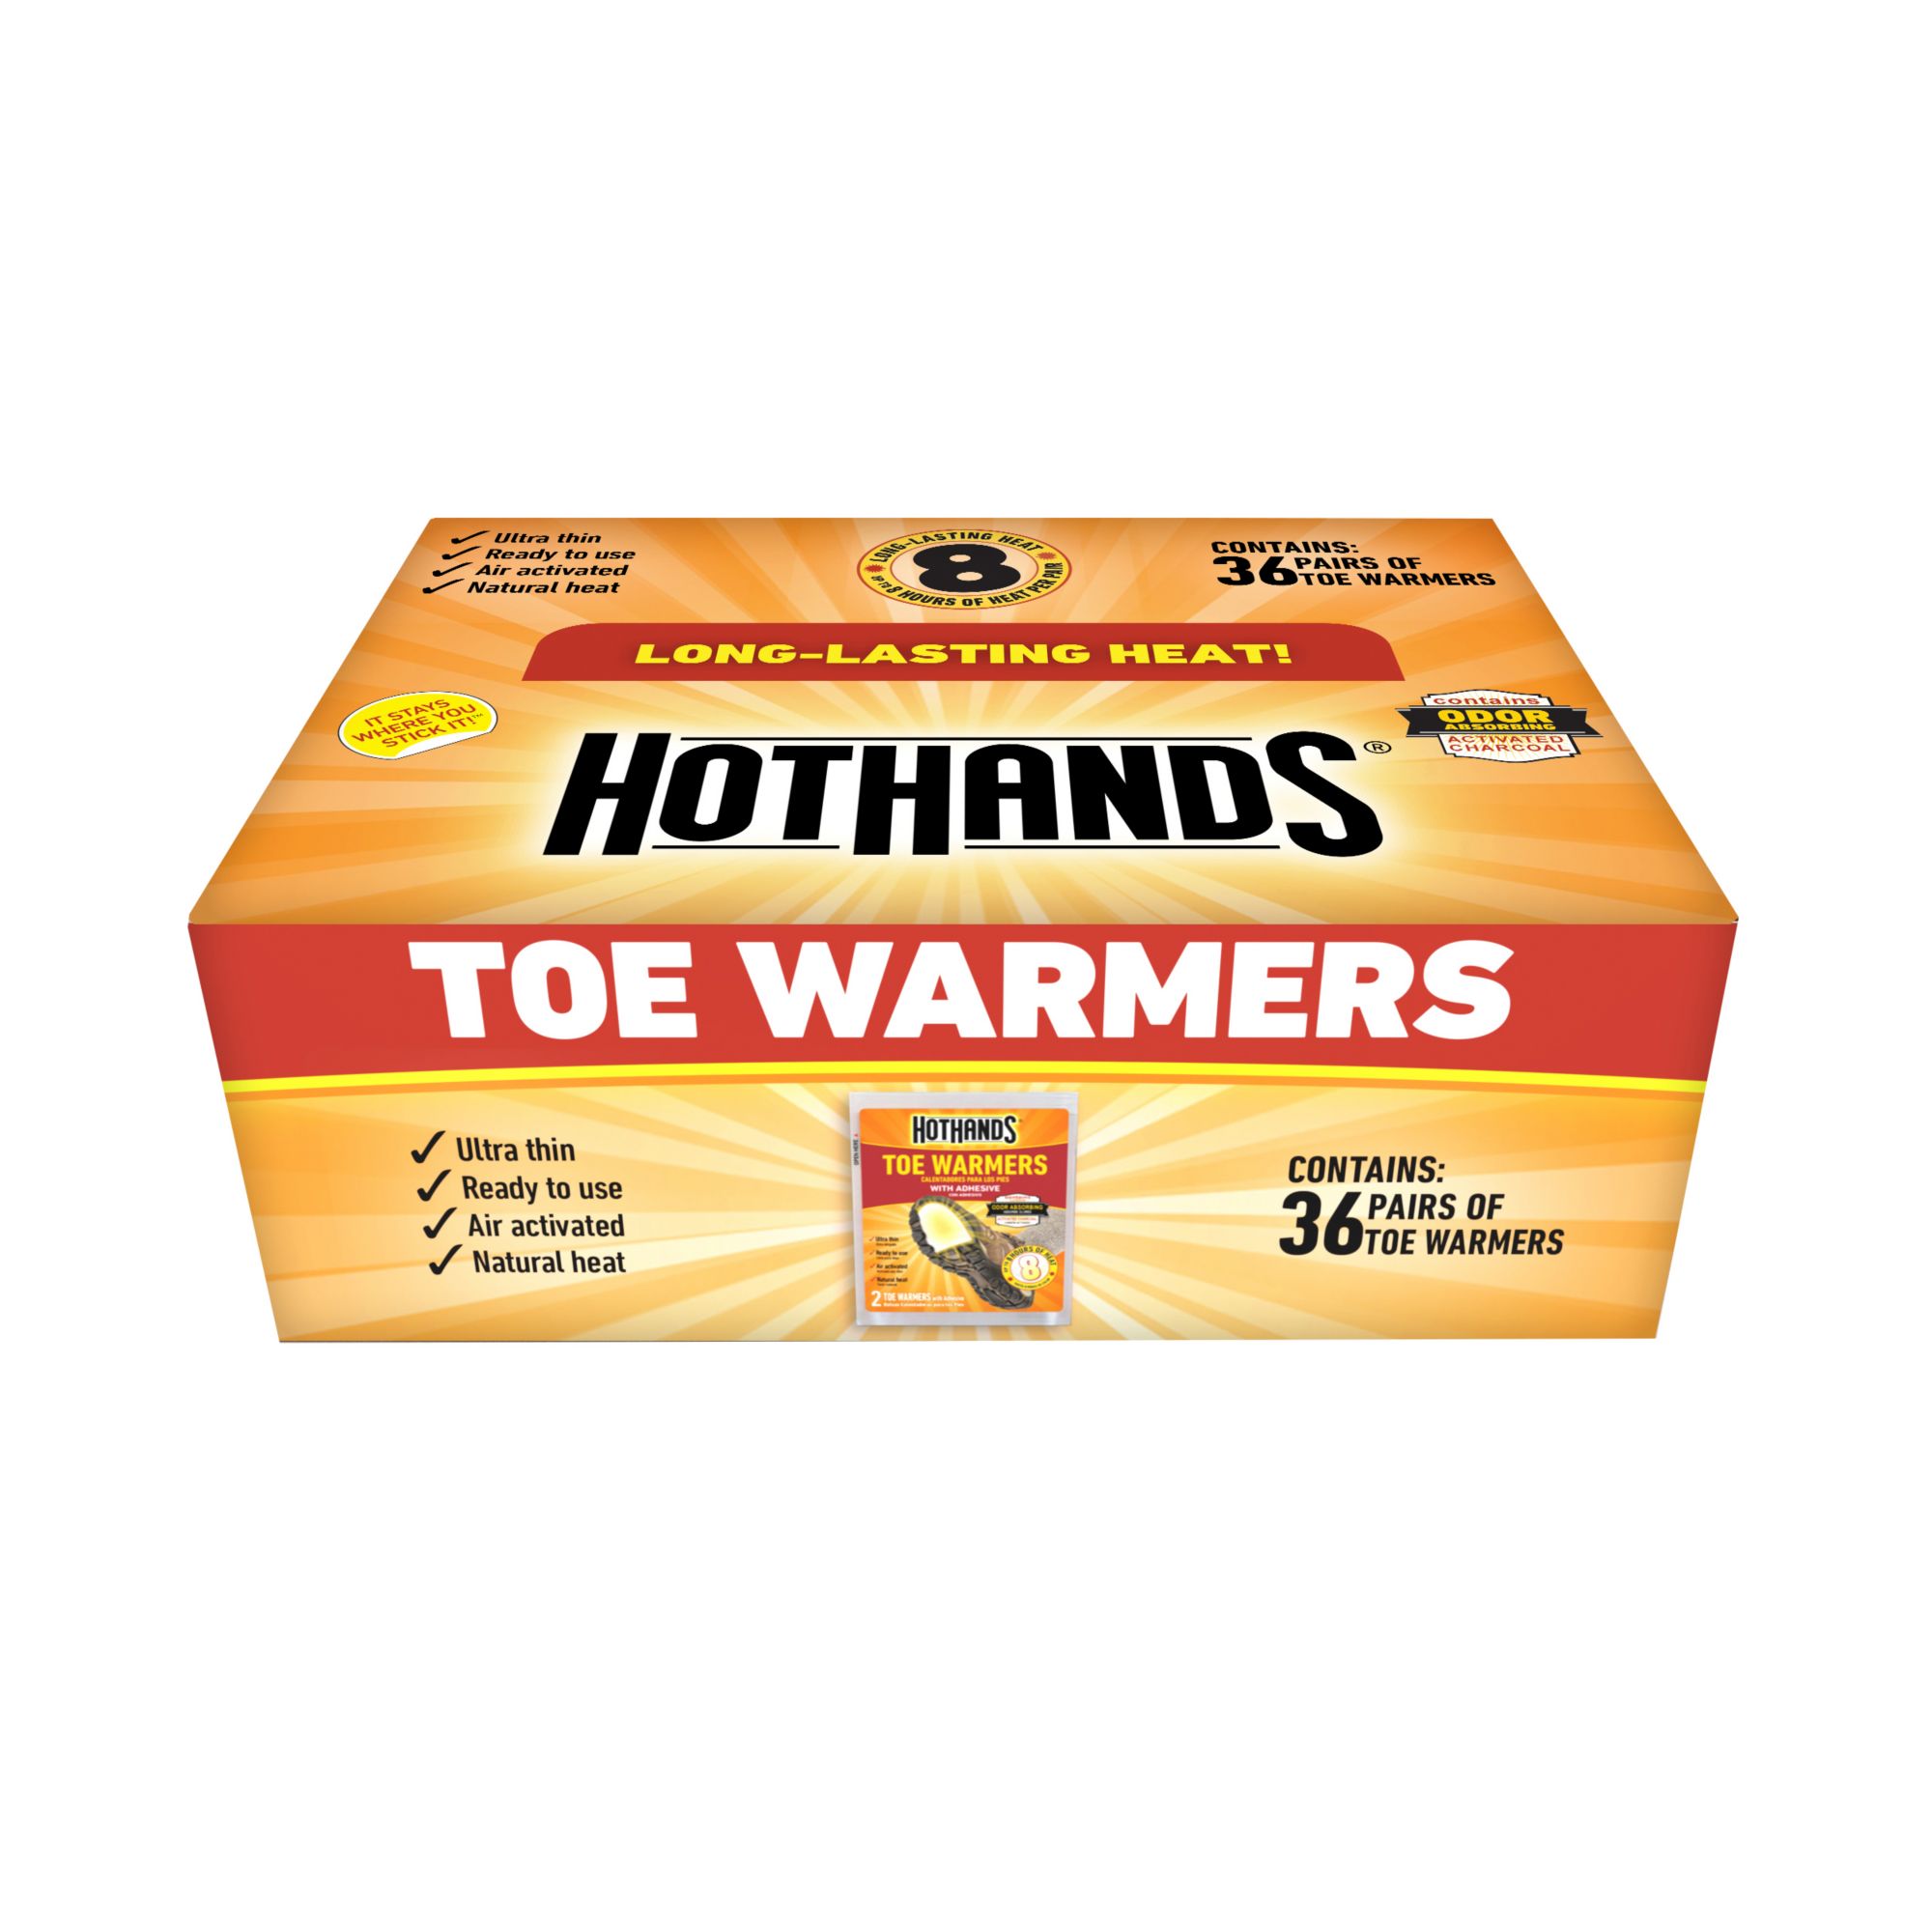 Hothands – Everyday Warmth